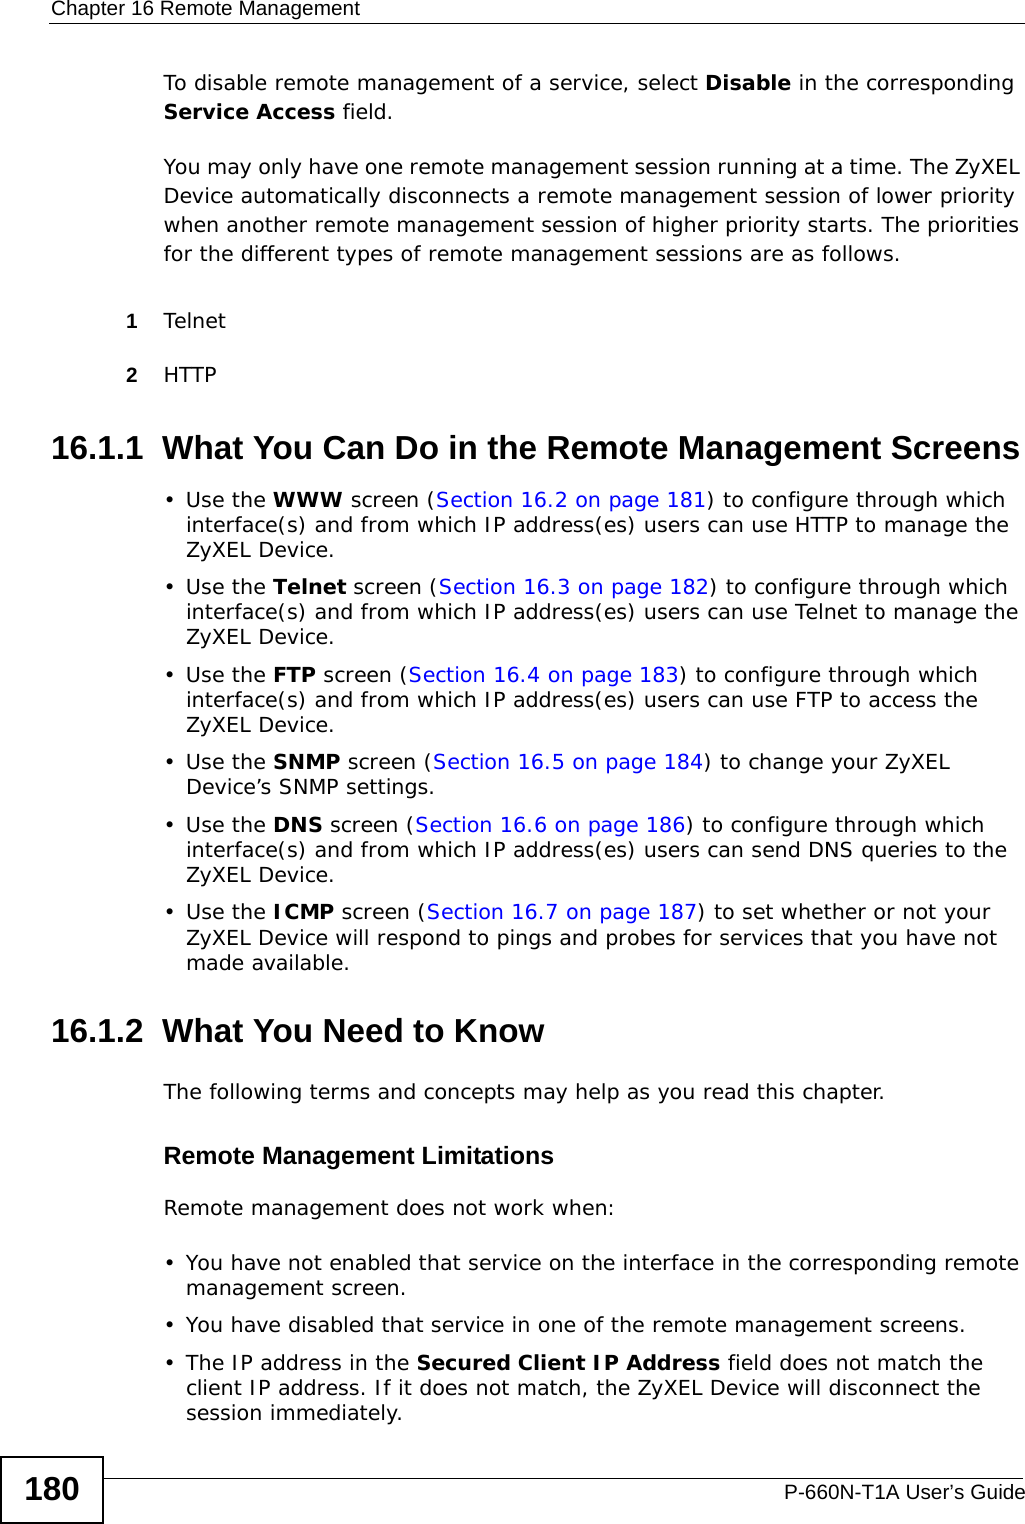 Chapter 16 Remote ManagementP-660N-T1A User’s Guide180To disable remote management of a service, select Disable in the corresponding Service Access field.You may only have one remote management session running at a time. The ZyXEL Device automatically disconnects a remote management session of lower priority when another remote management session of higher priority starts. The priorities for the different types of remote management sessions are as follows.1Telnet2HTTP16.1.1  What You Can Do in the Remote Management Screens•Use the WWW screen (Section 16.2 on page 181) to configure through which interface(s) and from which IP address(es) users can use HTTP to manage the ZyXEL Device.•Use the Telnet screen (Section 16.3 on page 182) to configure through which interface(s) and from which IP address(es) users can use Telnet to manage the ZyXEL Device.•Use the FTP screen (Section 16.4 on page 183) to configure through which interface(s) and from which IP address(es) users can use FTP to access the ZyXEL Device.•Use the SNMP screen (Section 16.5 on page 184) to change your ZyXEL Device’s SNMP settings.•Use the DNS screen (Section 16.6 on page 186) to configure through which interface(s) and from which IP address(es) users can send DNS queries to the ZyXEL Device.•Use the ICMP screen (Section 16.7 on page 187) to set whether or not your ZyXEL Device will respond to pings and probes for services that you have not made available.16.1.2  What You Need to KnowThe following terms and concepts may help as you read this chapter.Remote Management LimitationsRemote management does not work when:• You have not enabled that service on the interface in the corresponding remote management screen.• You have disabled that service in one of the remote management screens.• The IP address in the Secured Client IP Address field does not match the client IP address. If it does not match, the ZyXEL Device will disconnect the session immediately.